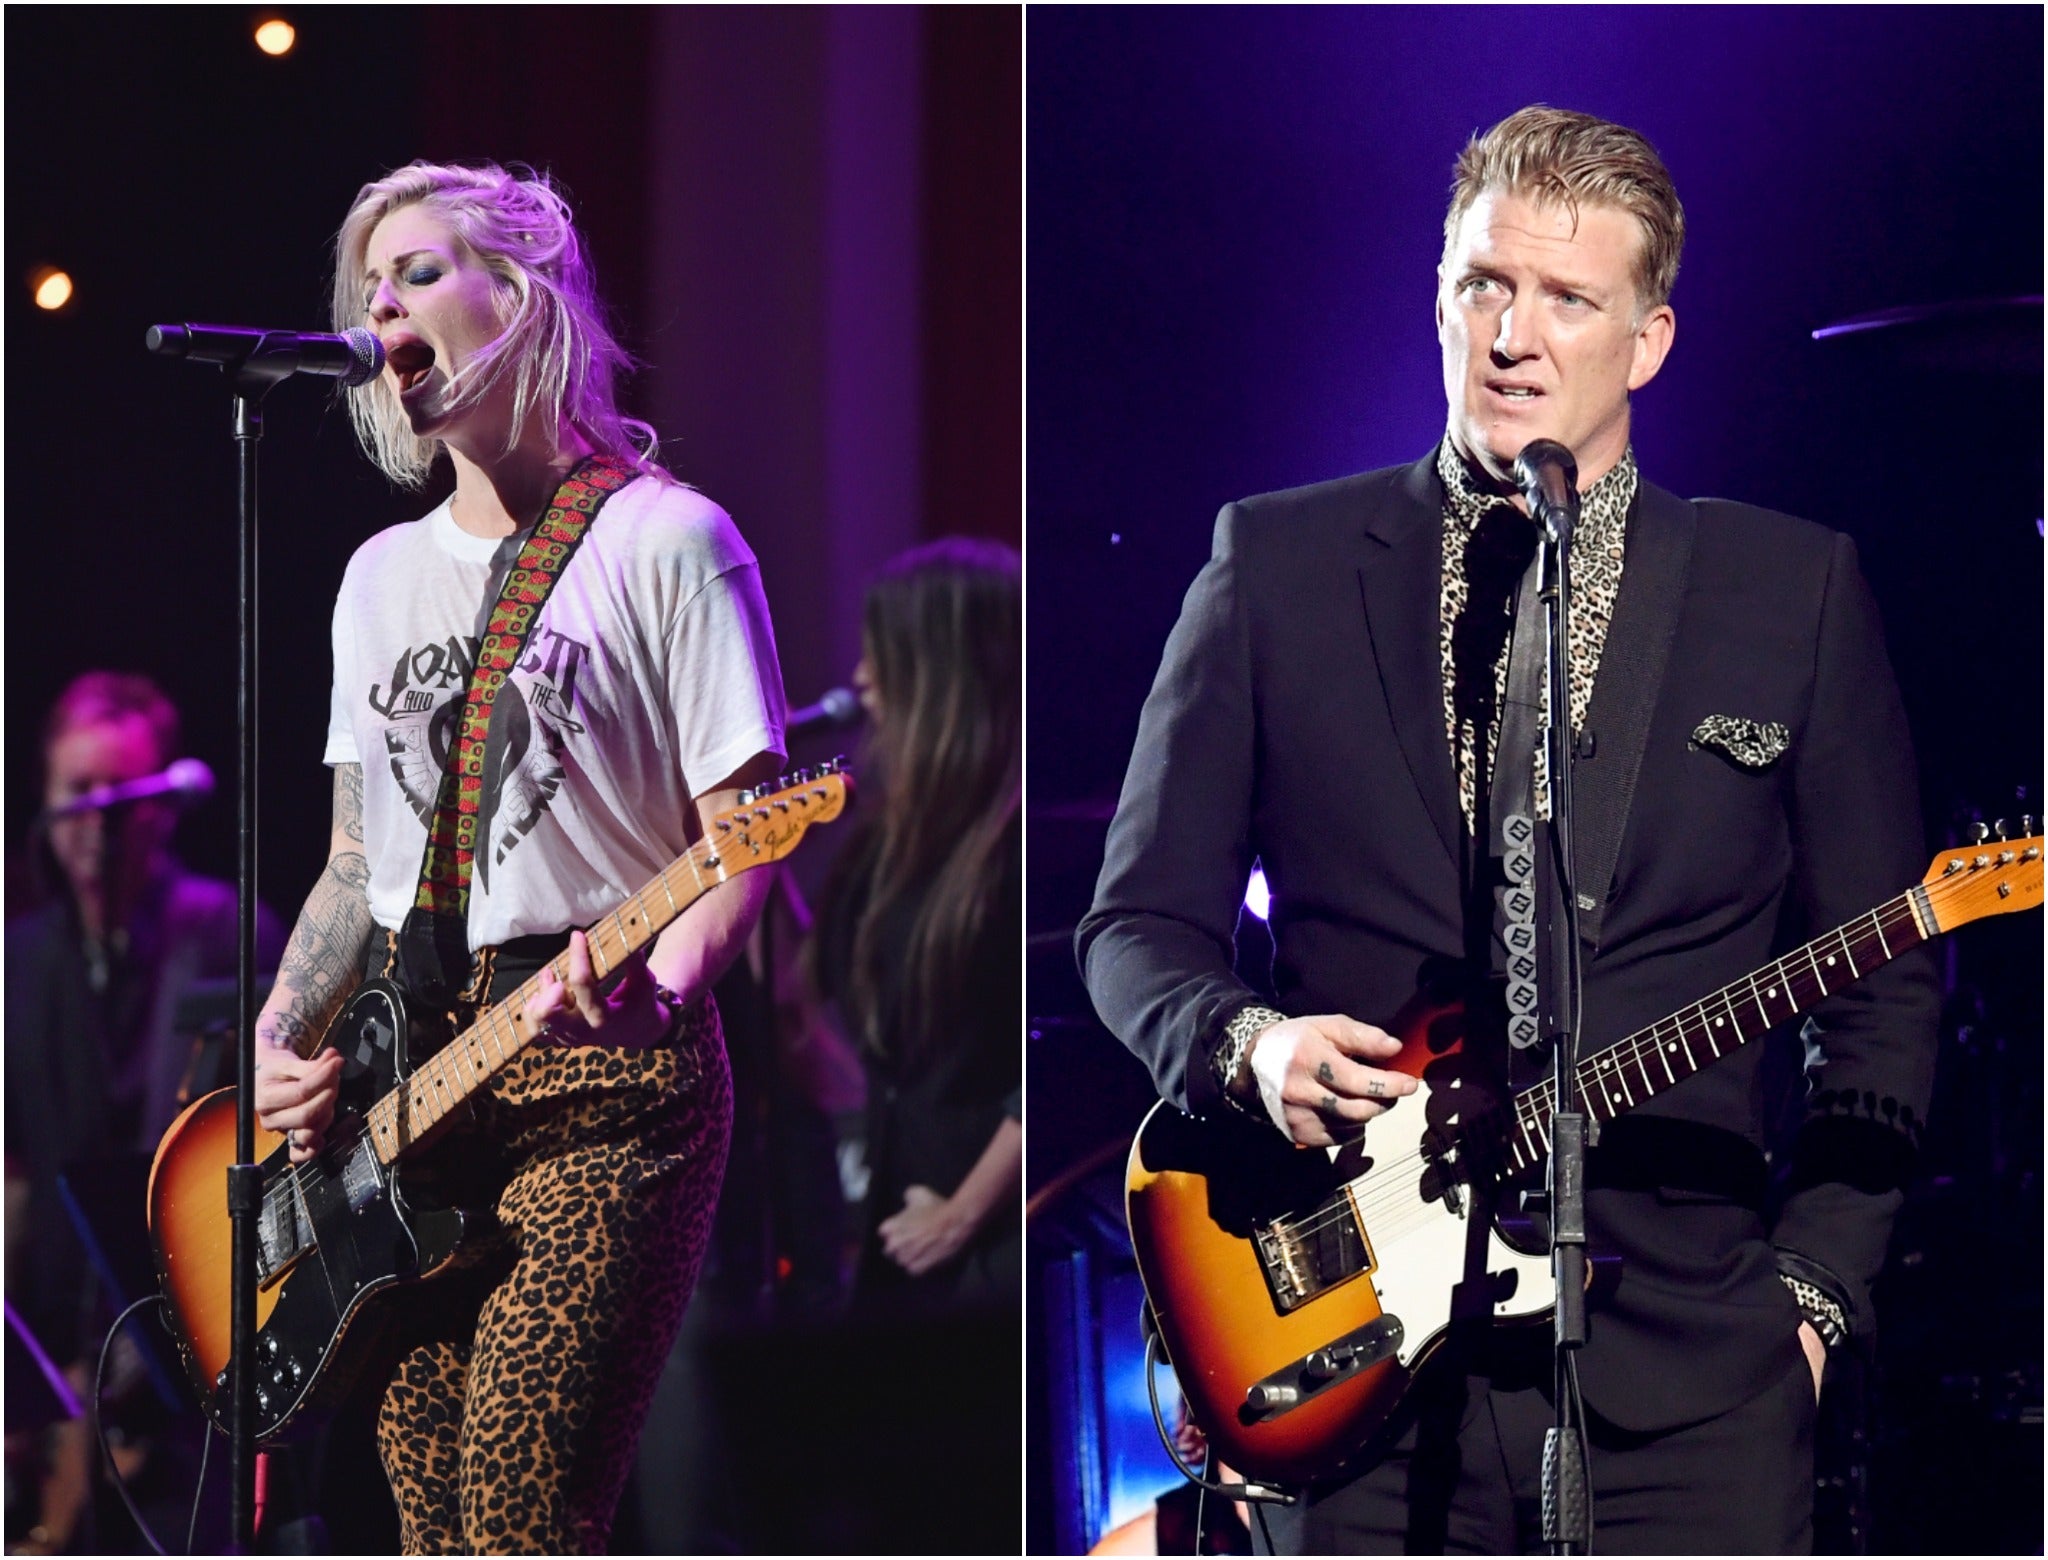 Brody Dalle (left) is locked in a custody battle over her three children with Josh Homme